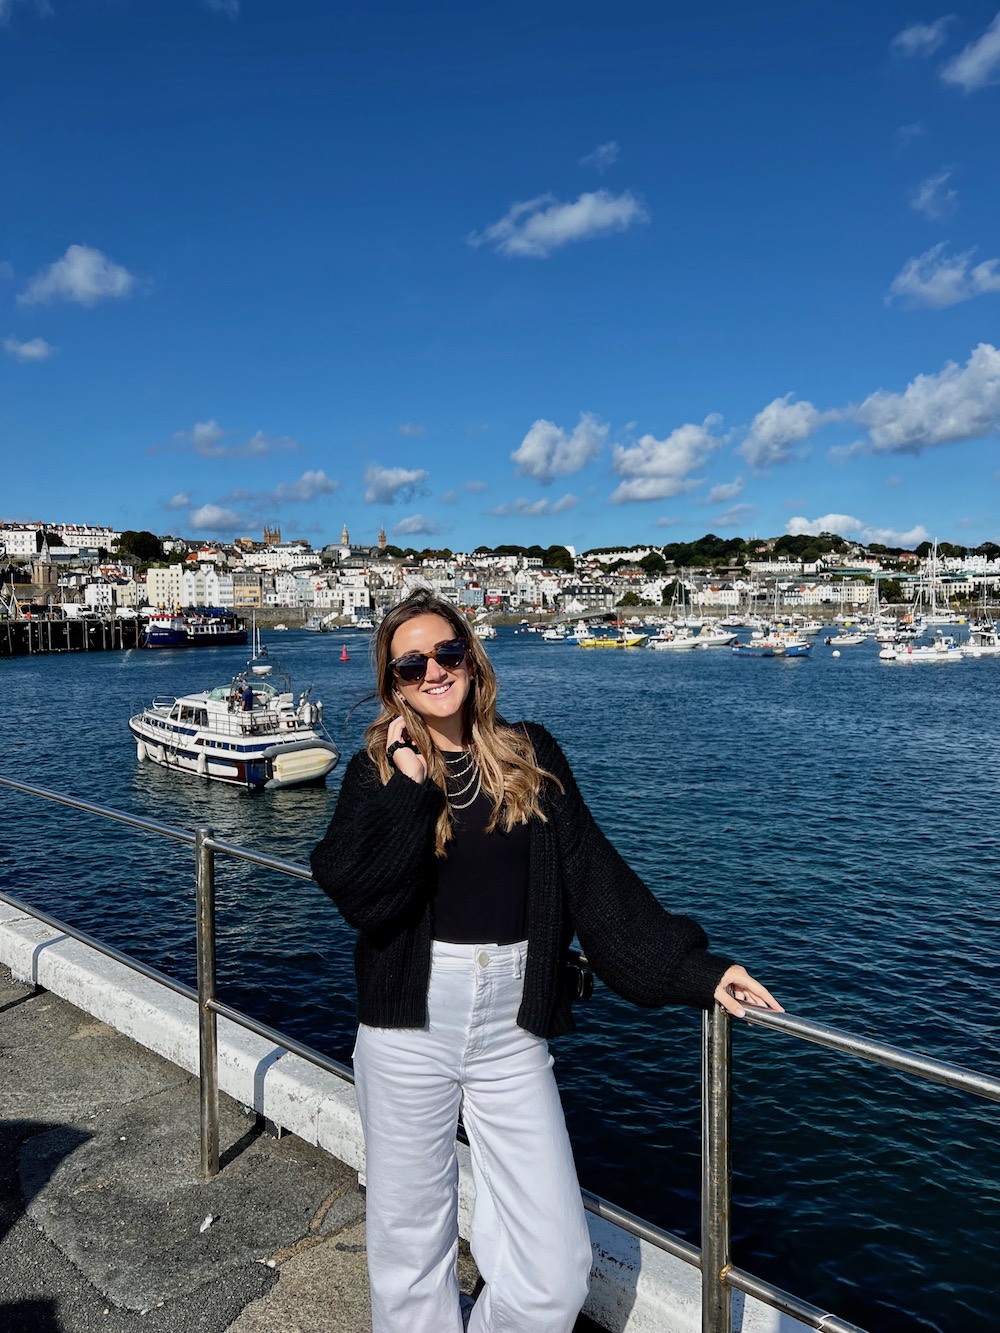 The Travel Hack in Guernsey